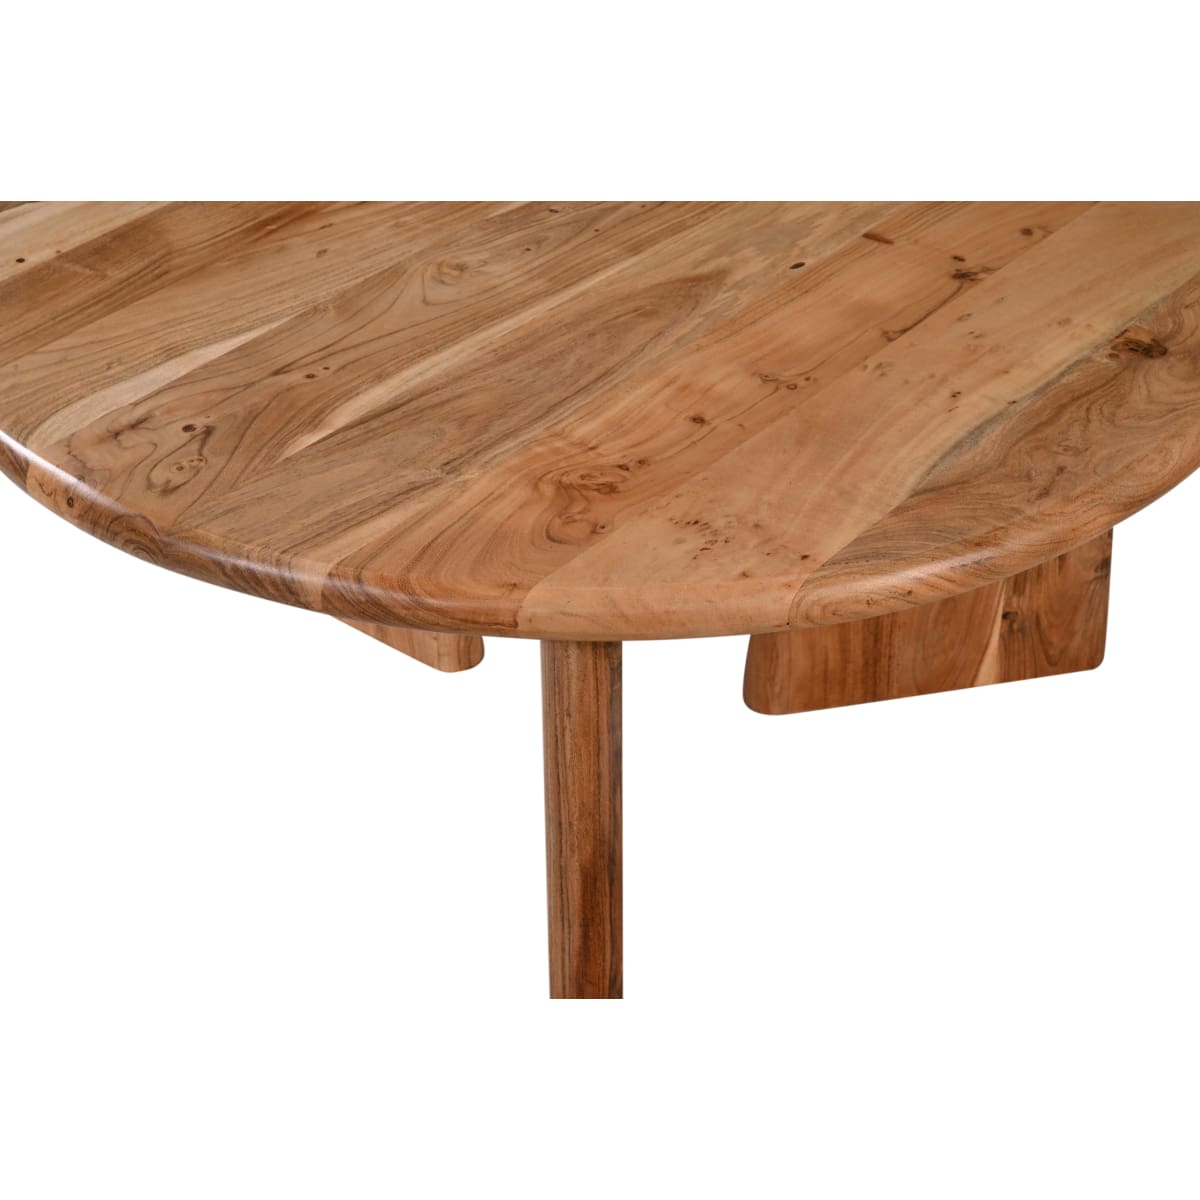 Aron Round Coffee Table - coffee-tables